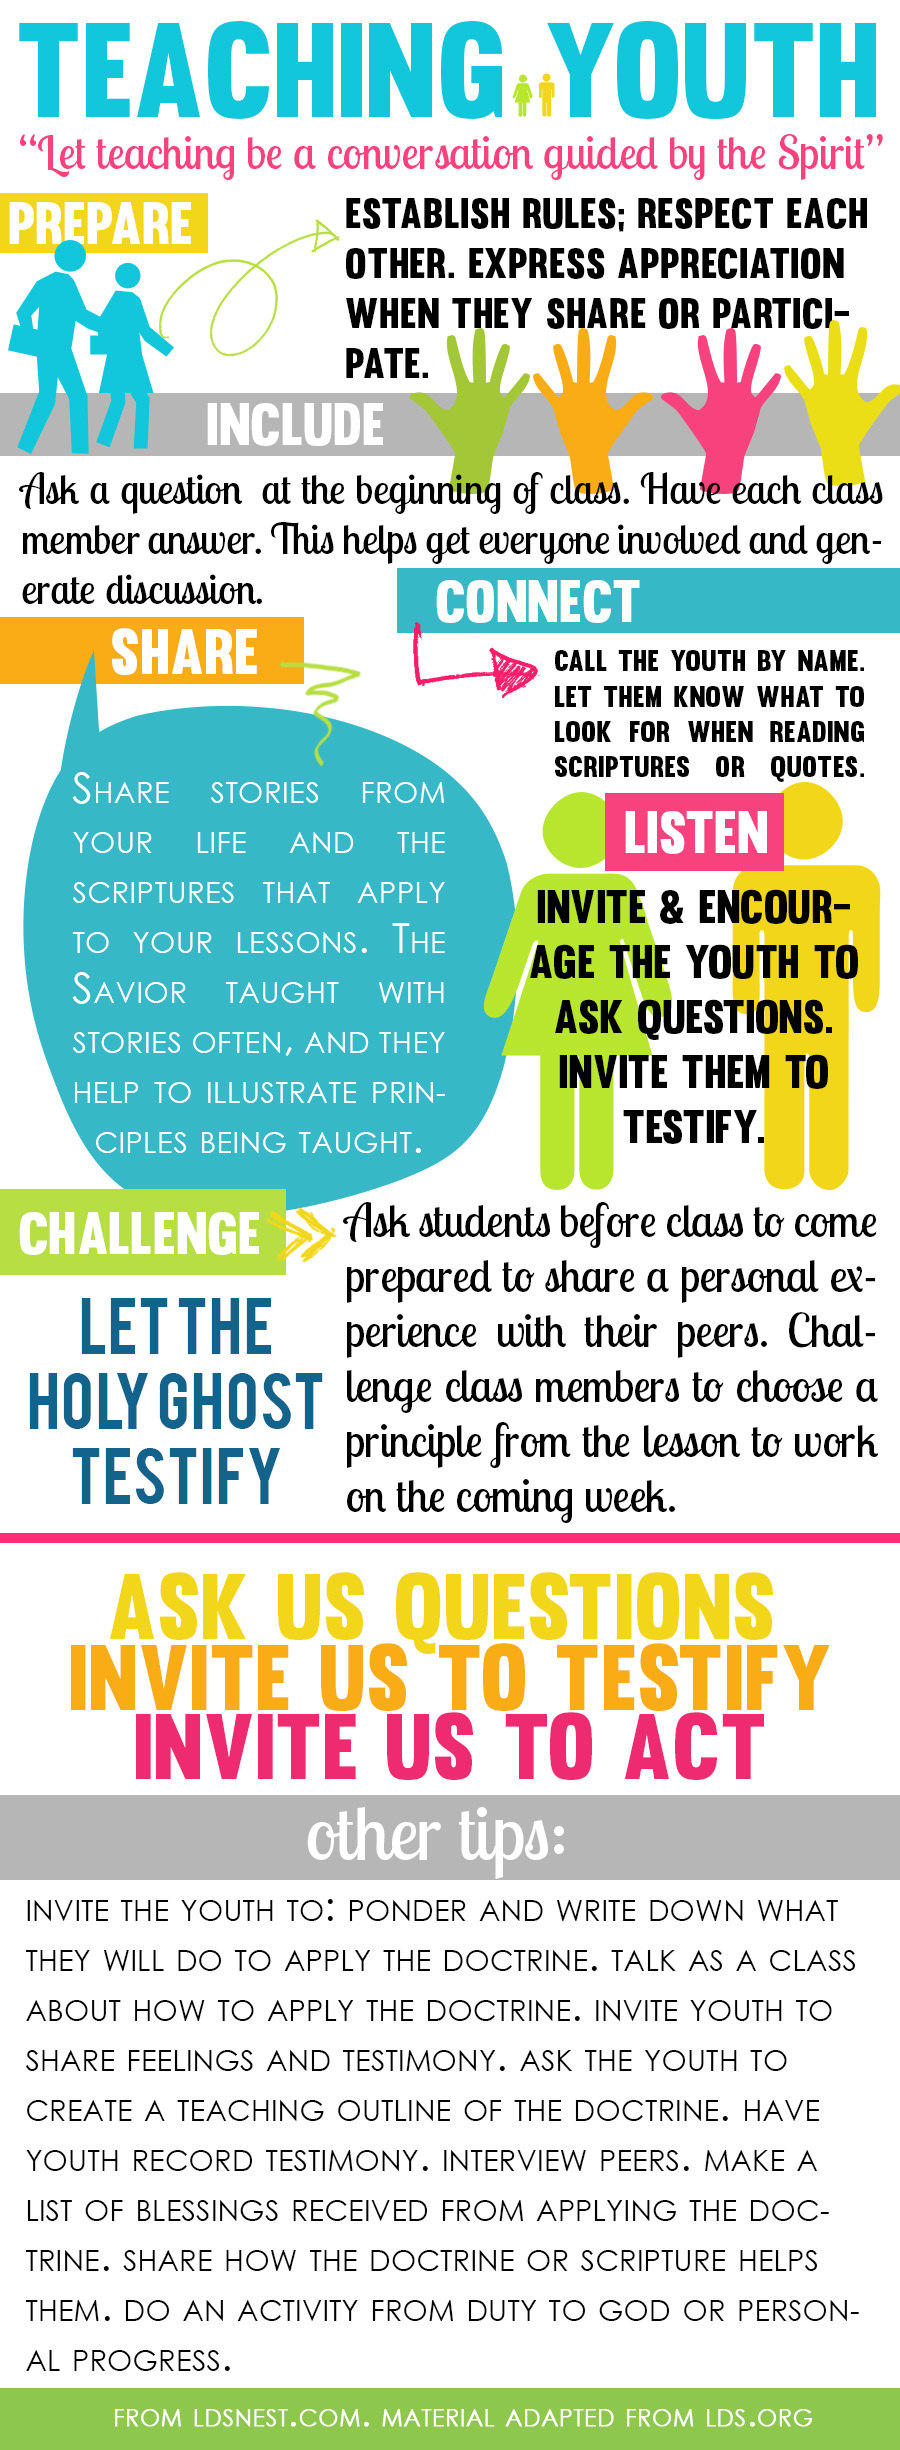 Tips for Teaching Youth infographic from LDSNEST.COM. Tips for teaching Come, Follow Me and engaging the youth. #ldsyouth #ldsnest #lds #ldsyw 